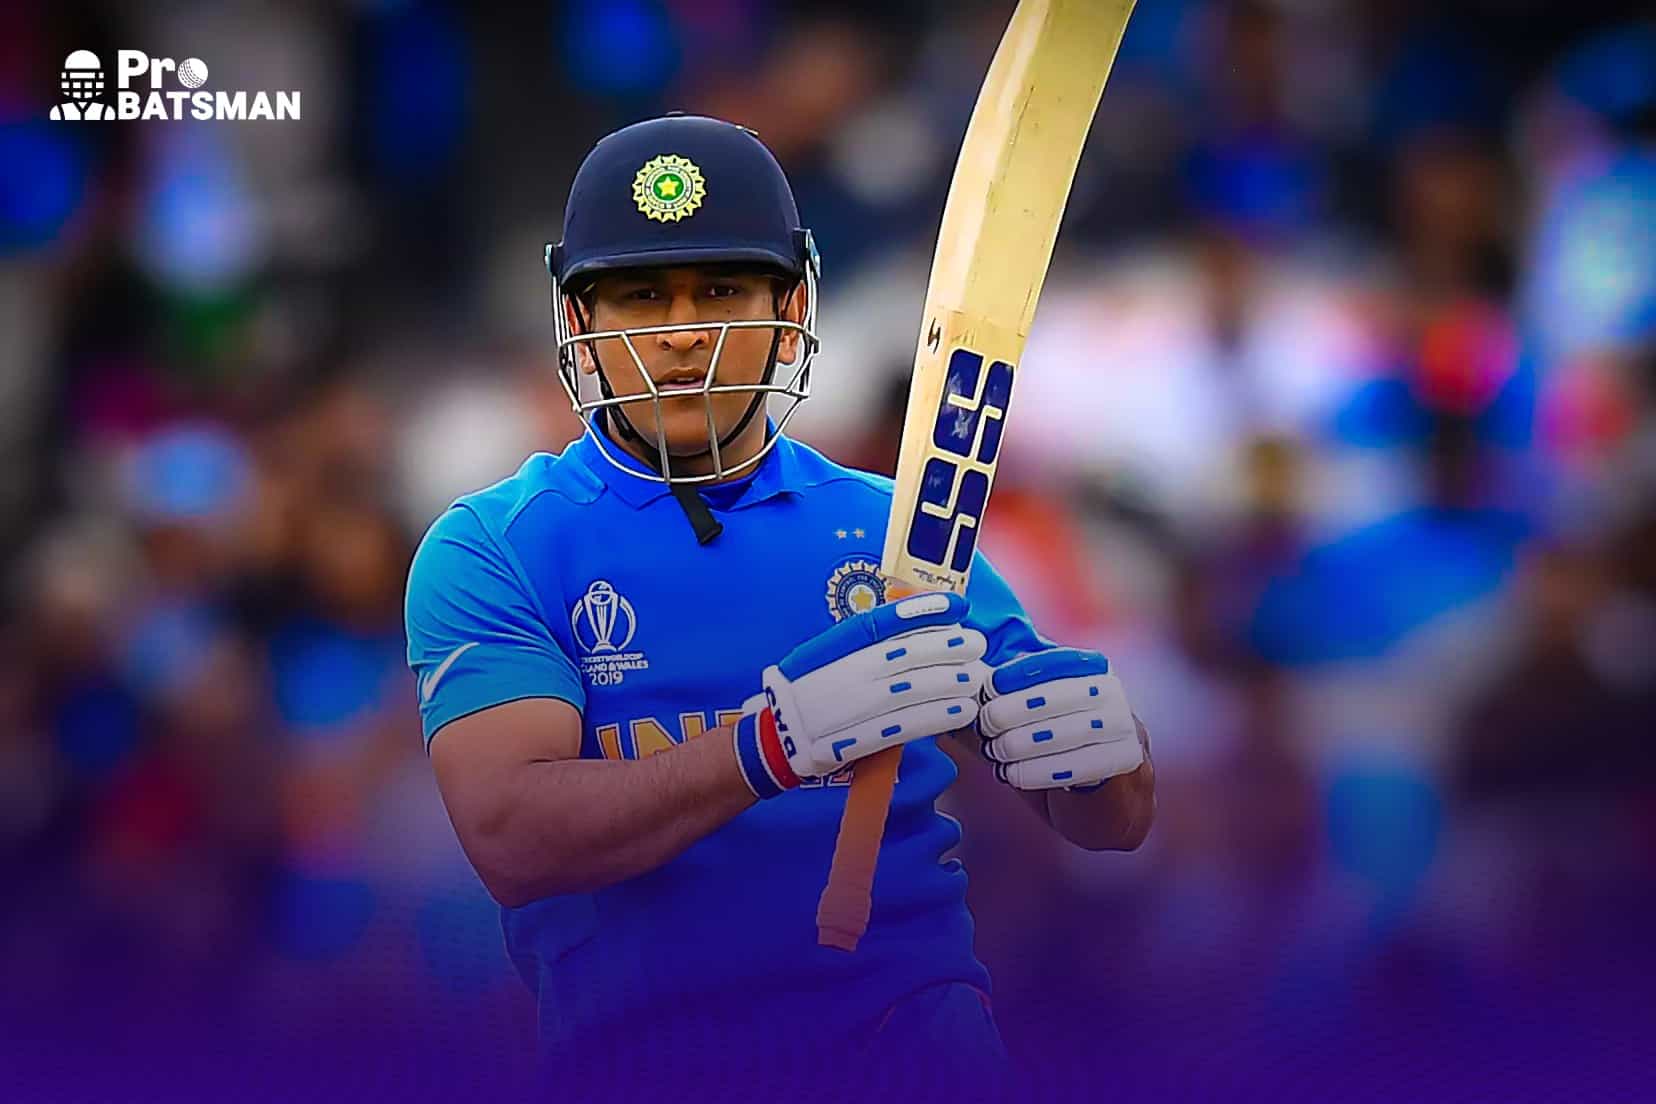 Top 5 Record of MS Dhoni That Will Remain Unbreakable - ProBatsman